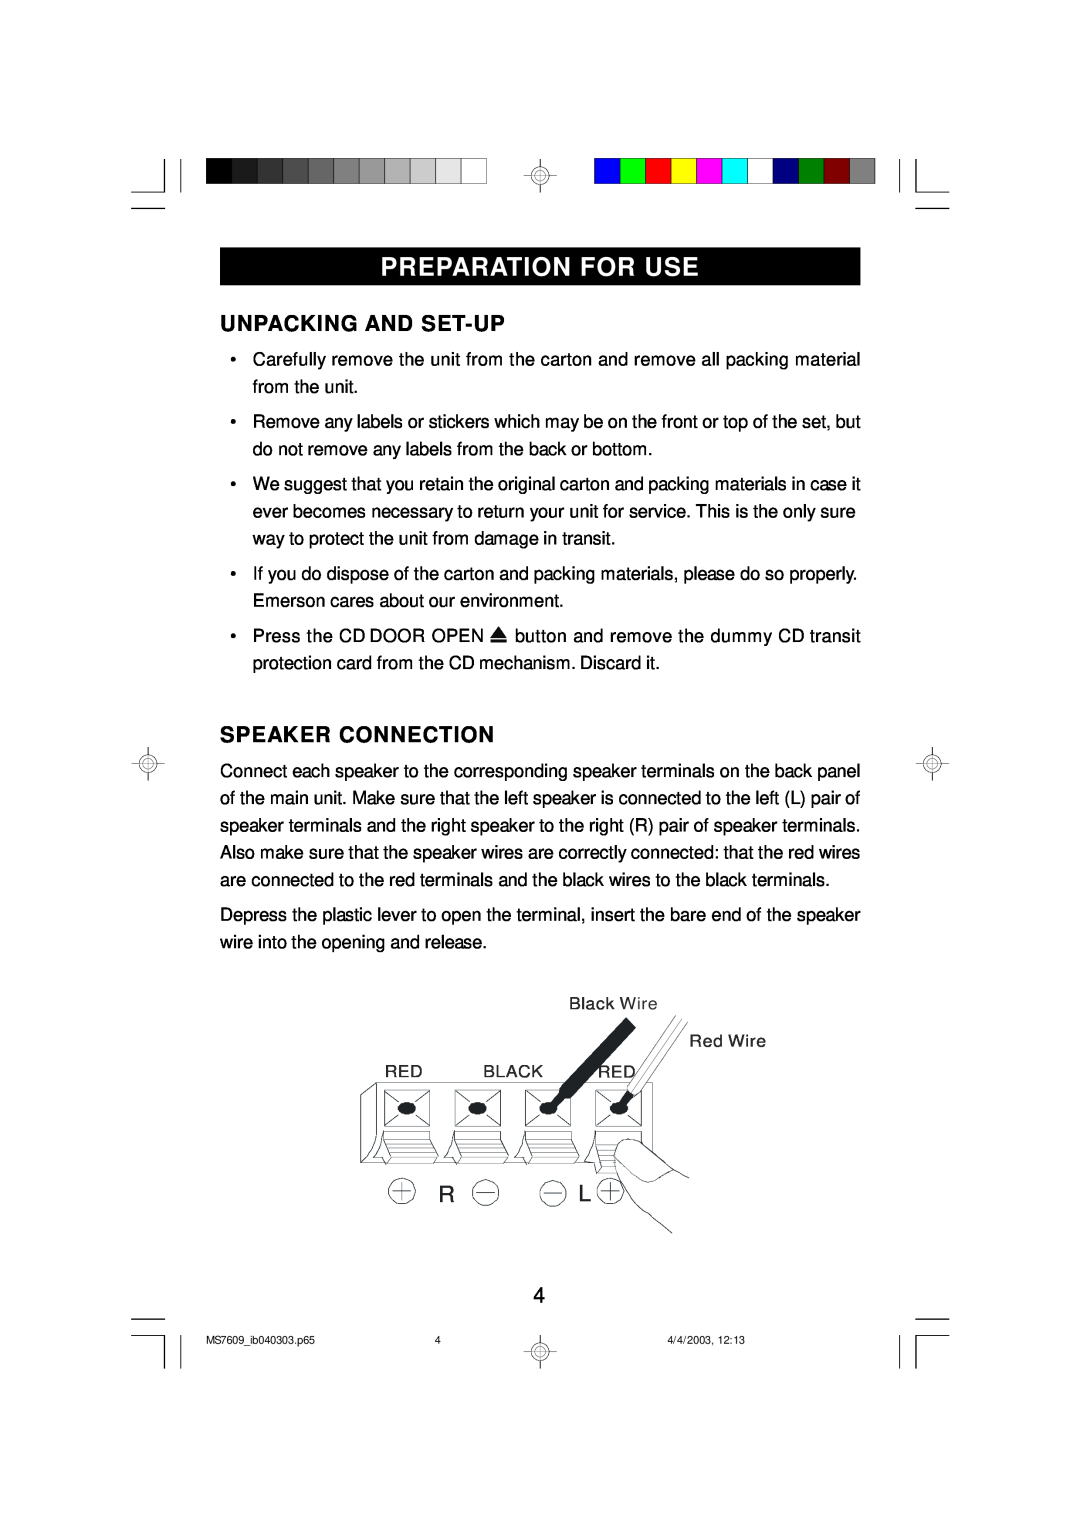 Emerson MS7609 owner manual Preparation For Use, Unpacking And Set-Up, Speaker Connection 